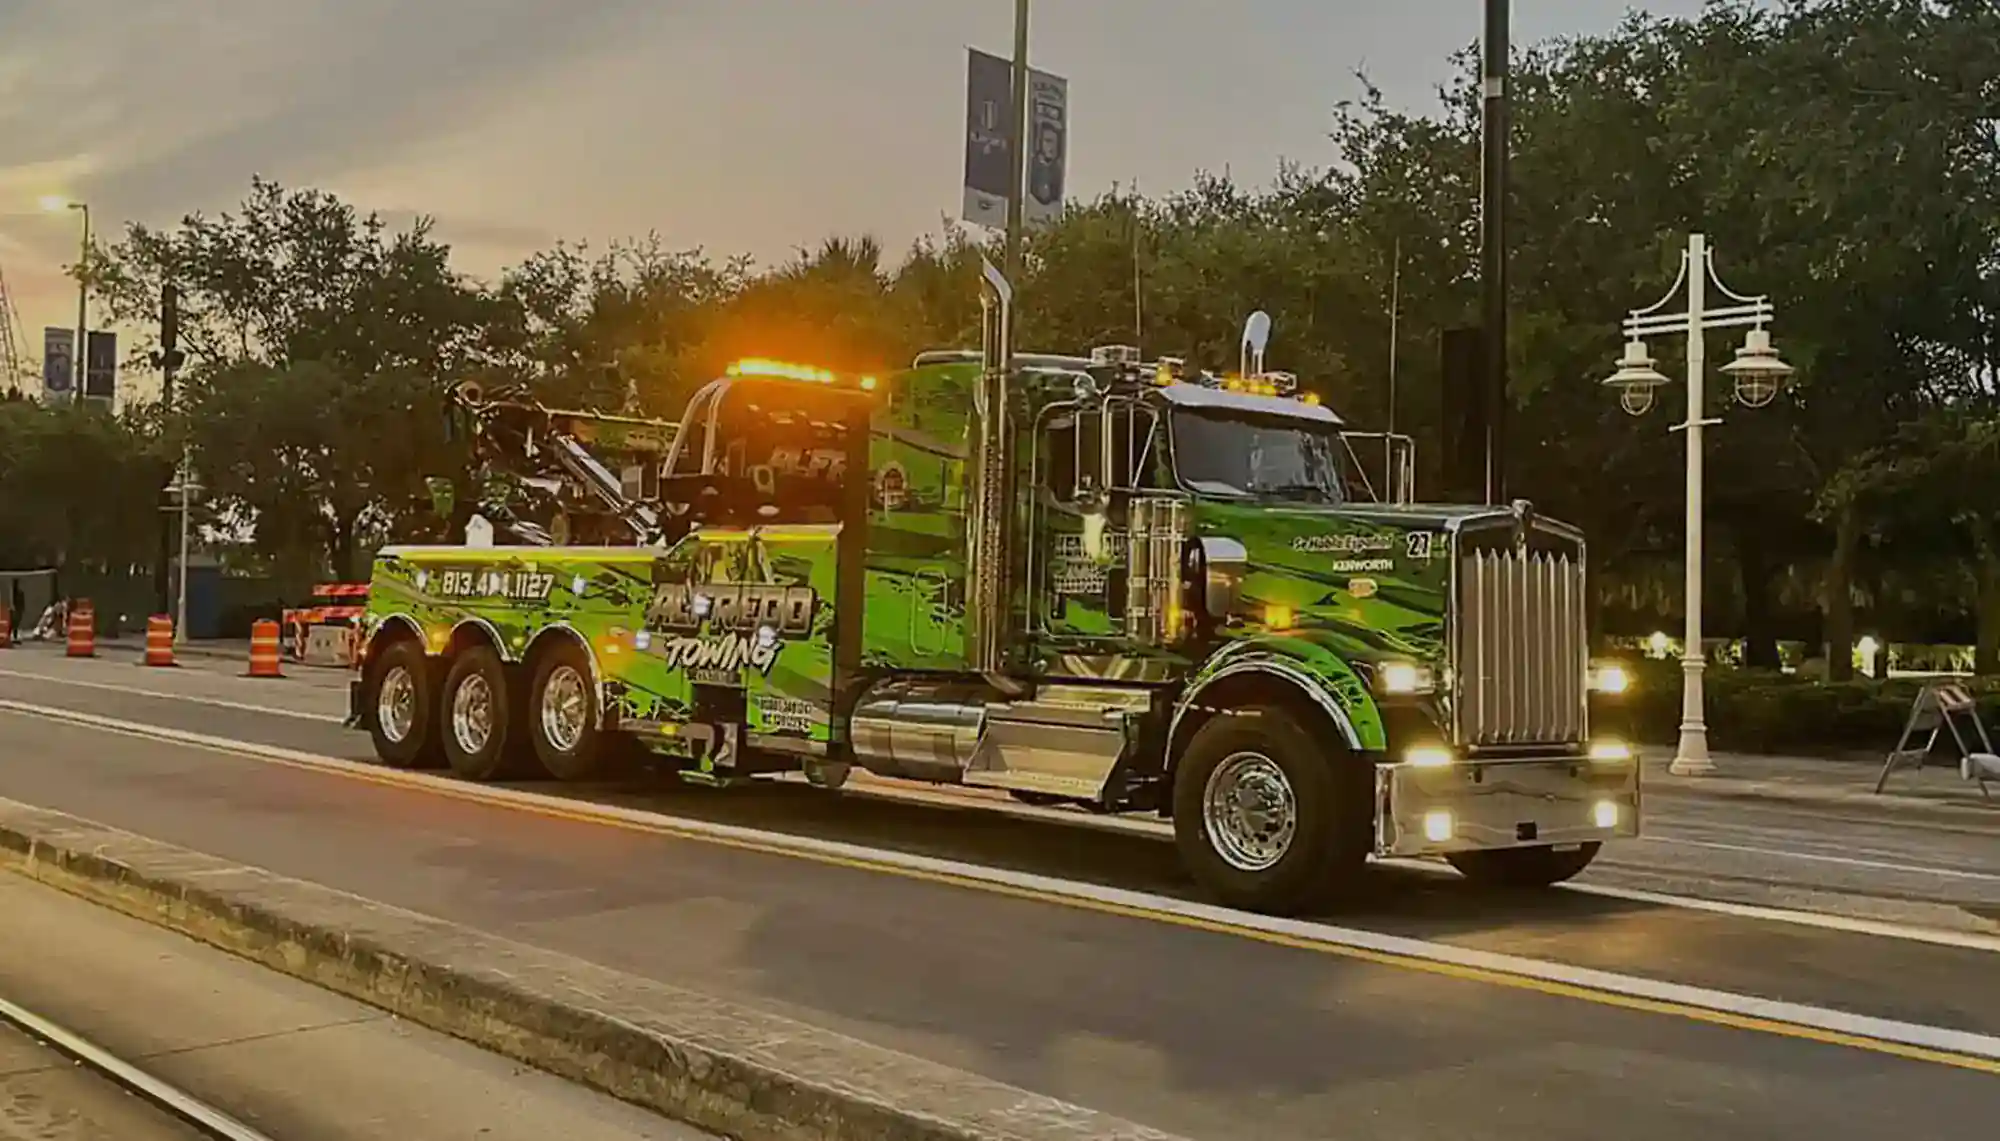 image of the main tow truck of Alfredo Towing Service for towing in Tampa